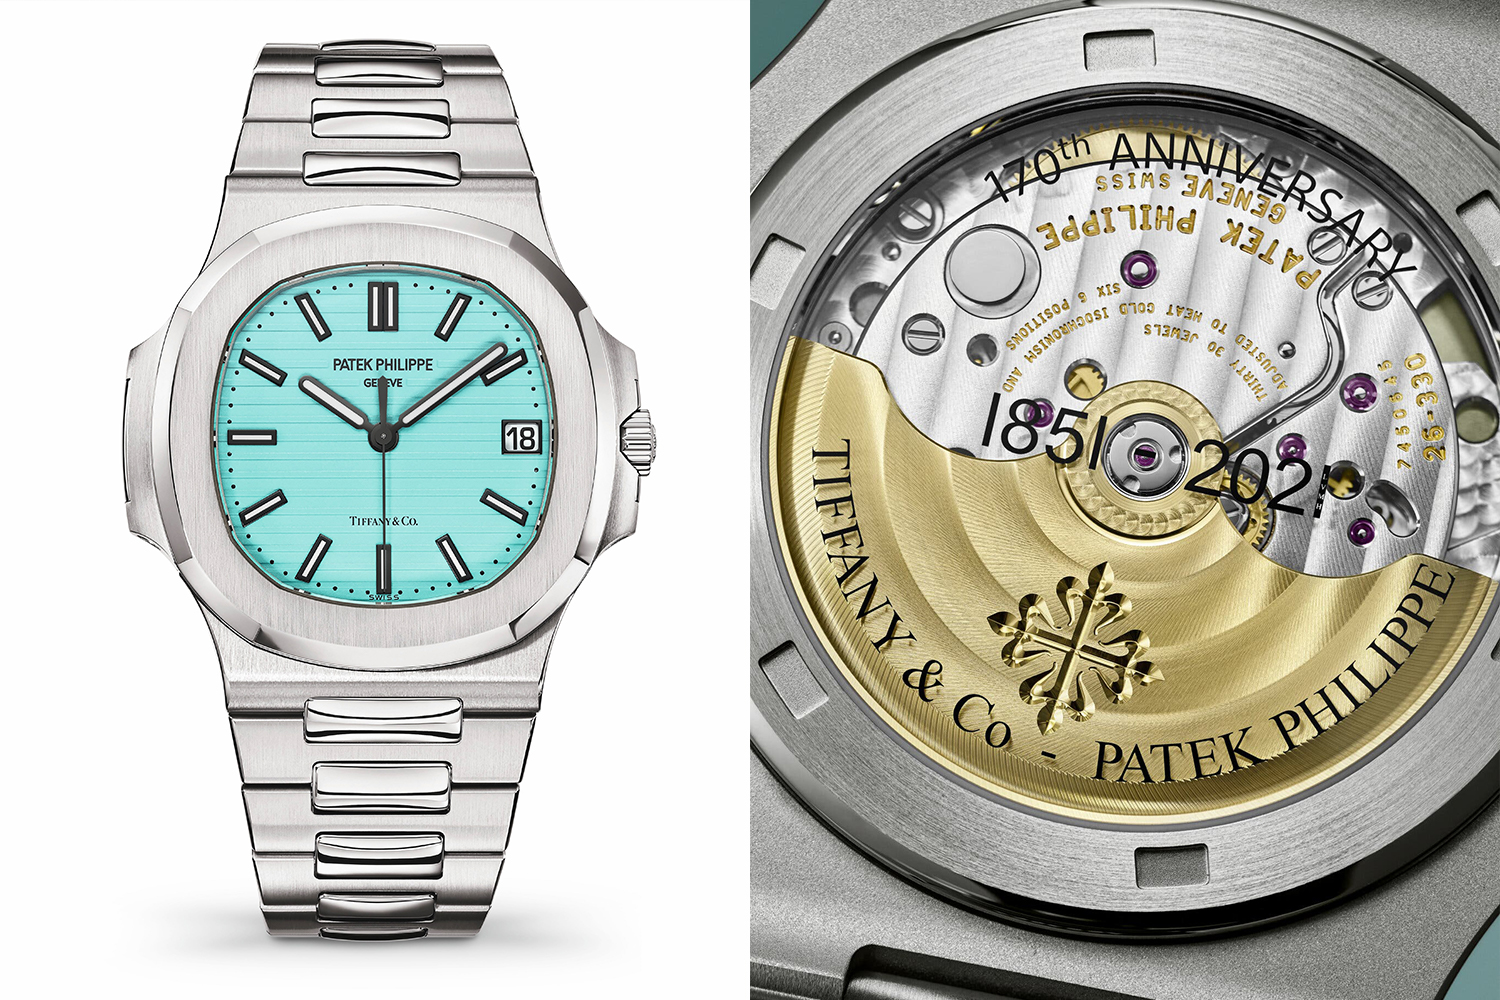 The double signed Patek Philippe Nautilus ref. 5711 and Tiffany & Co. watch, on the left showing the Tiffany Blue dial and on the right showing the see-through caseback with an Easter egg in the year 2021